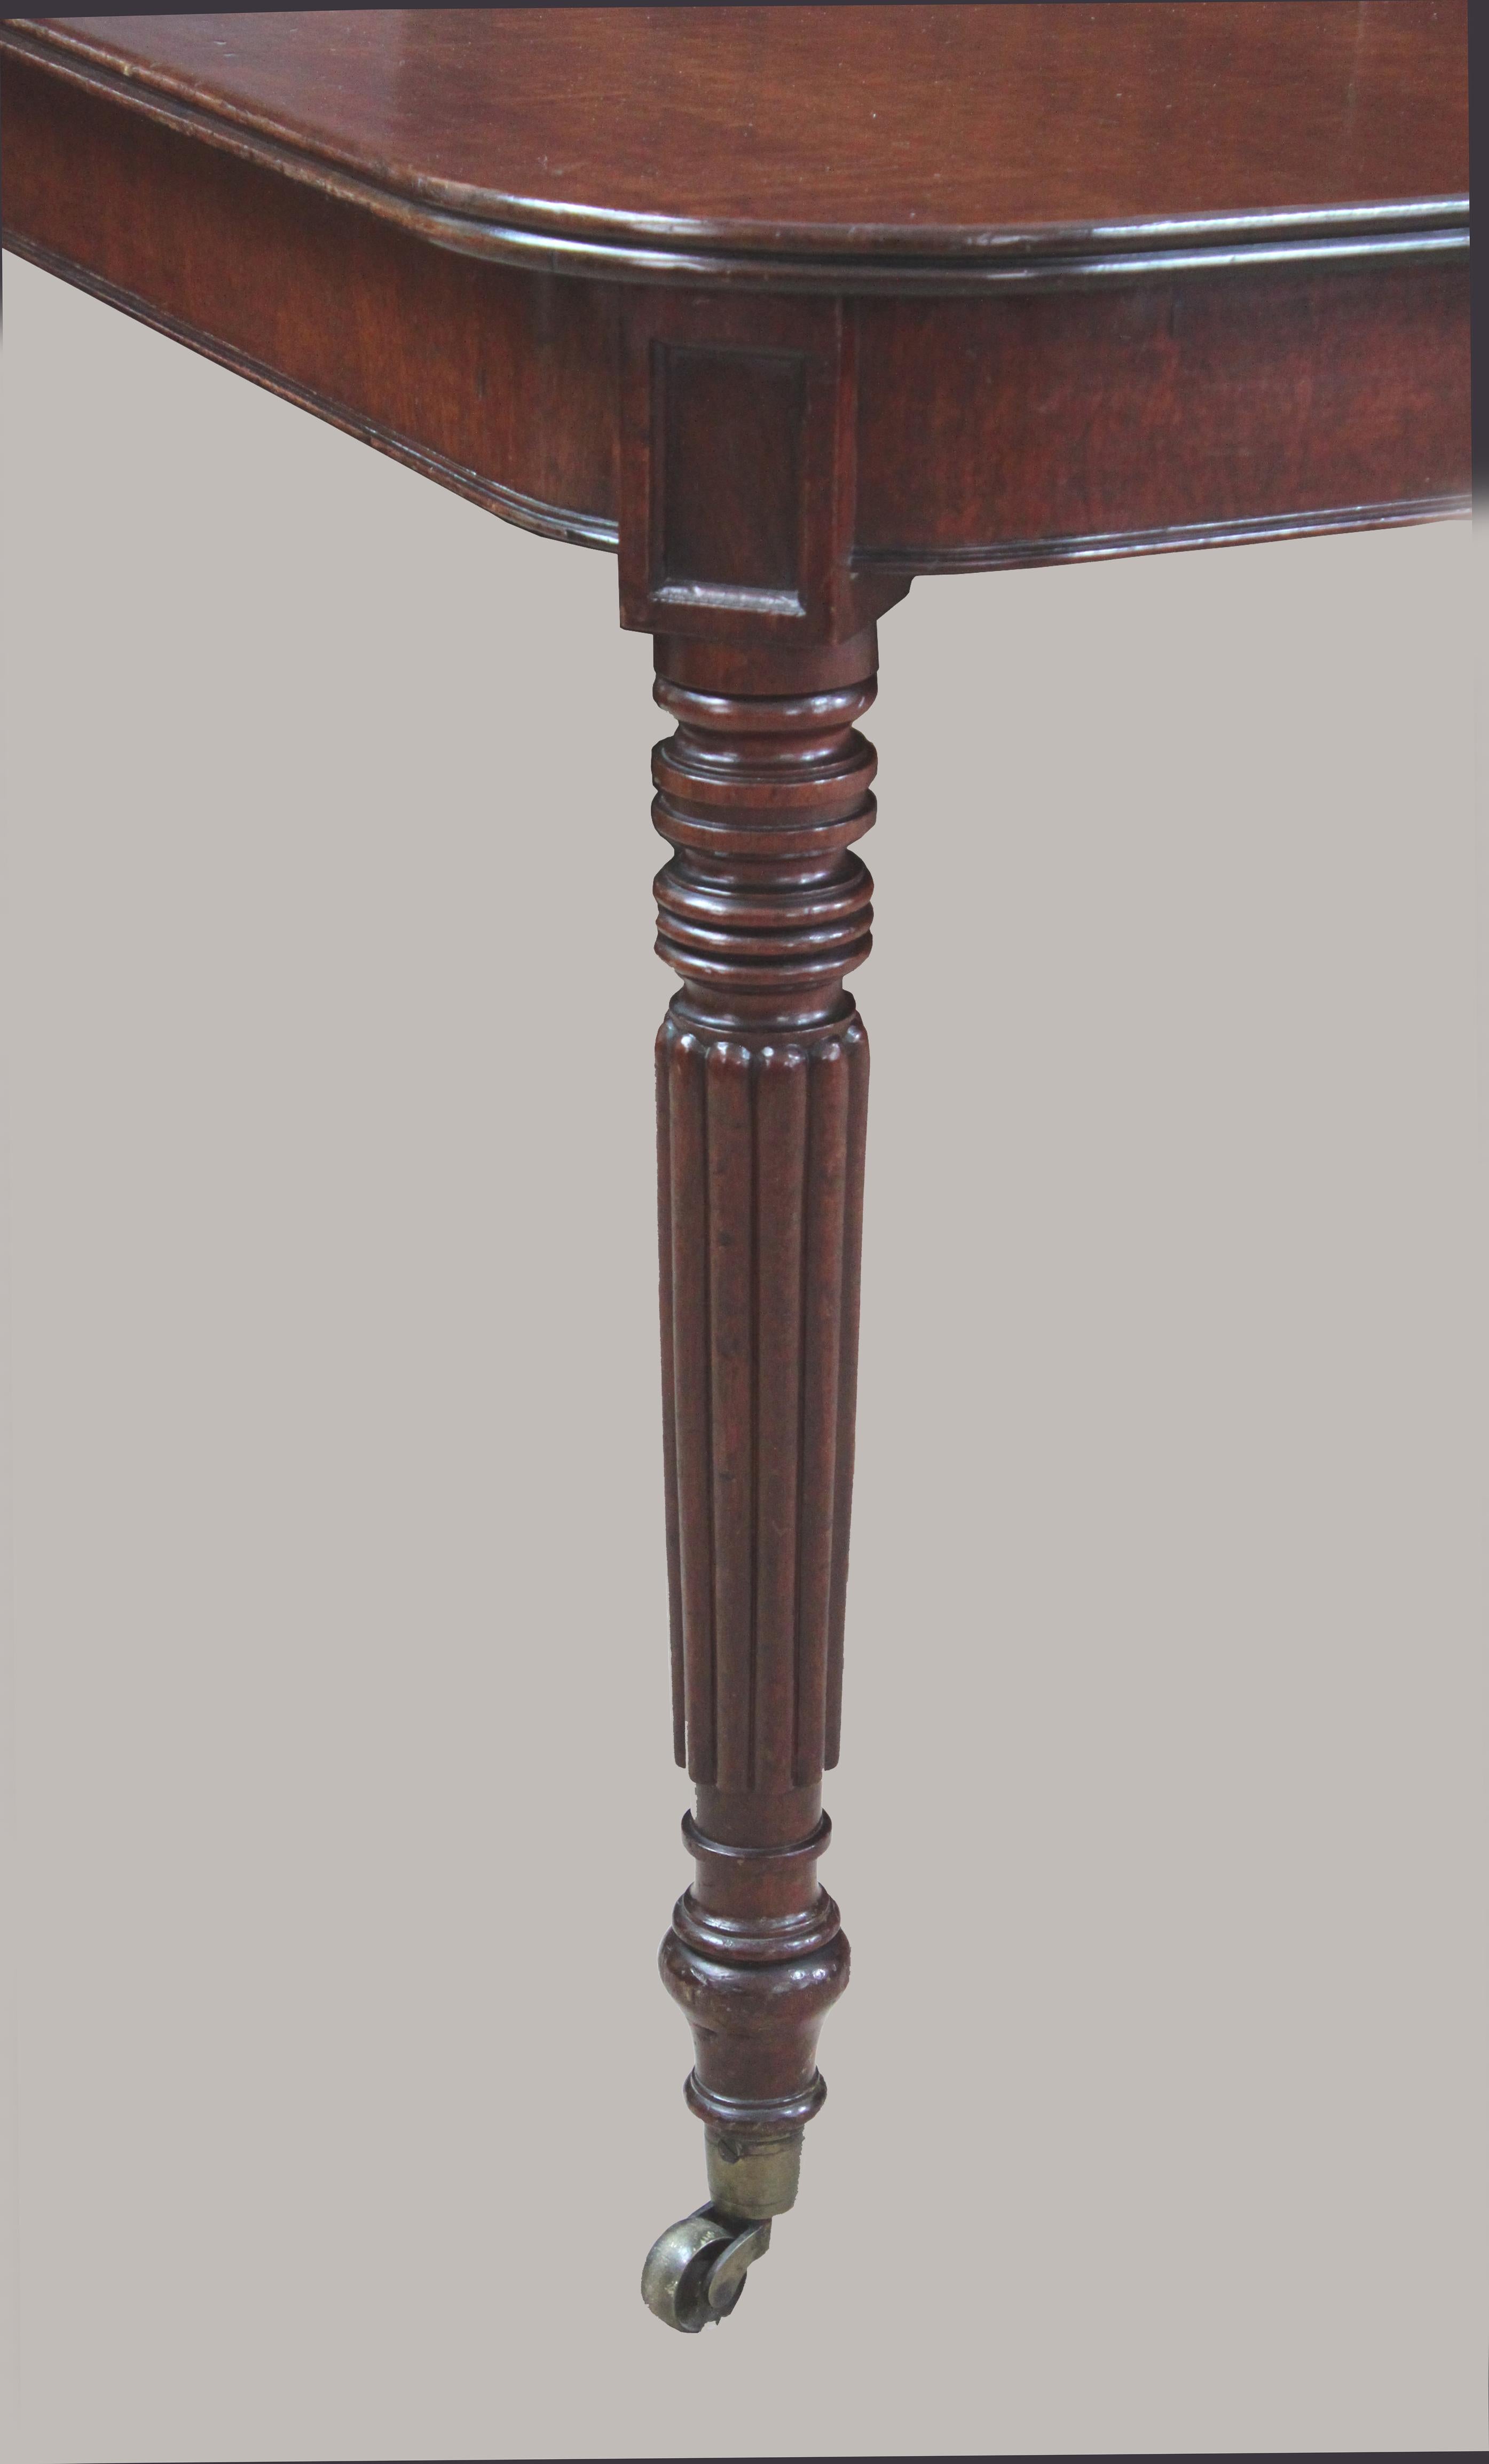 Regency Mahogany Extending Dining Table Attributed to Gillows of Lancaster In Good Condition For Sale In Bradford-on-Avon, Wiltshire